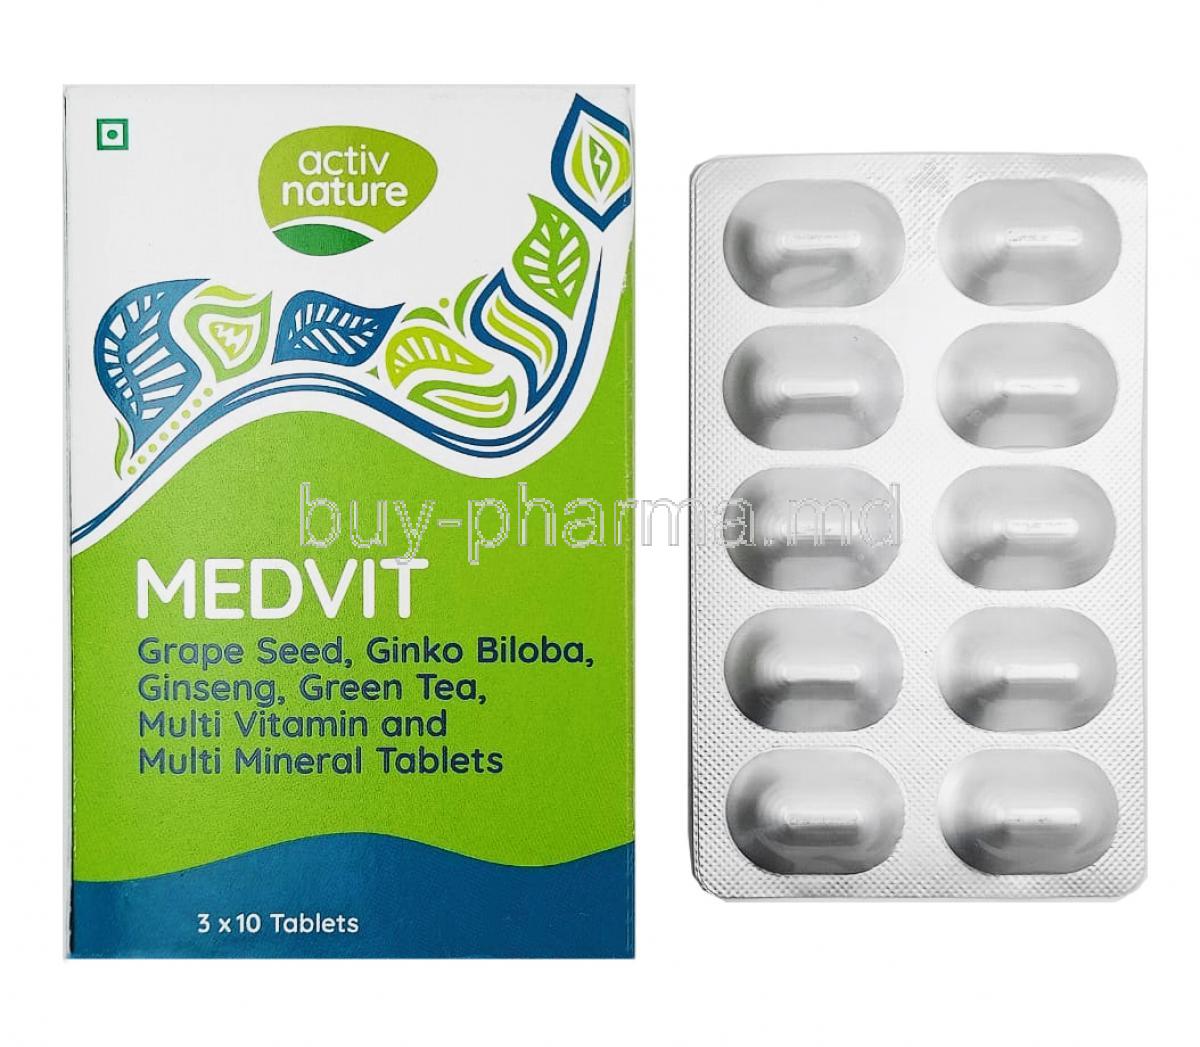 Medvit box and tablet